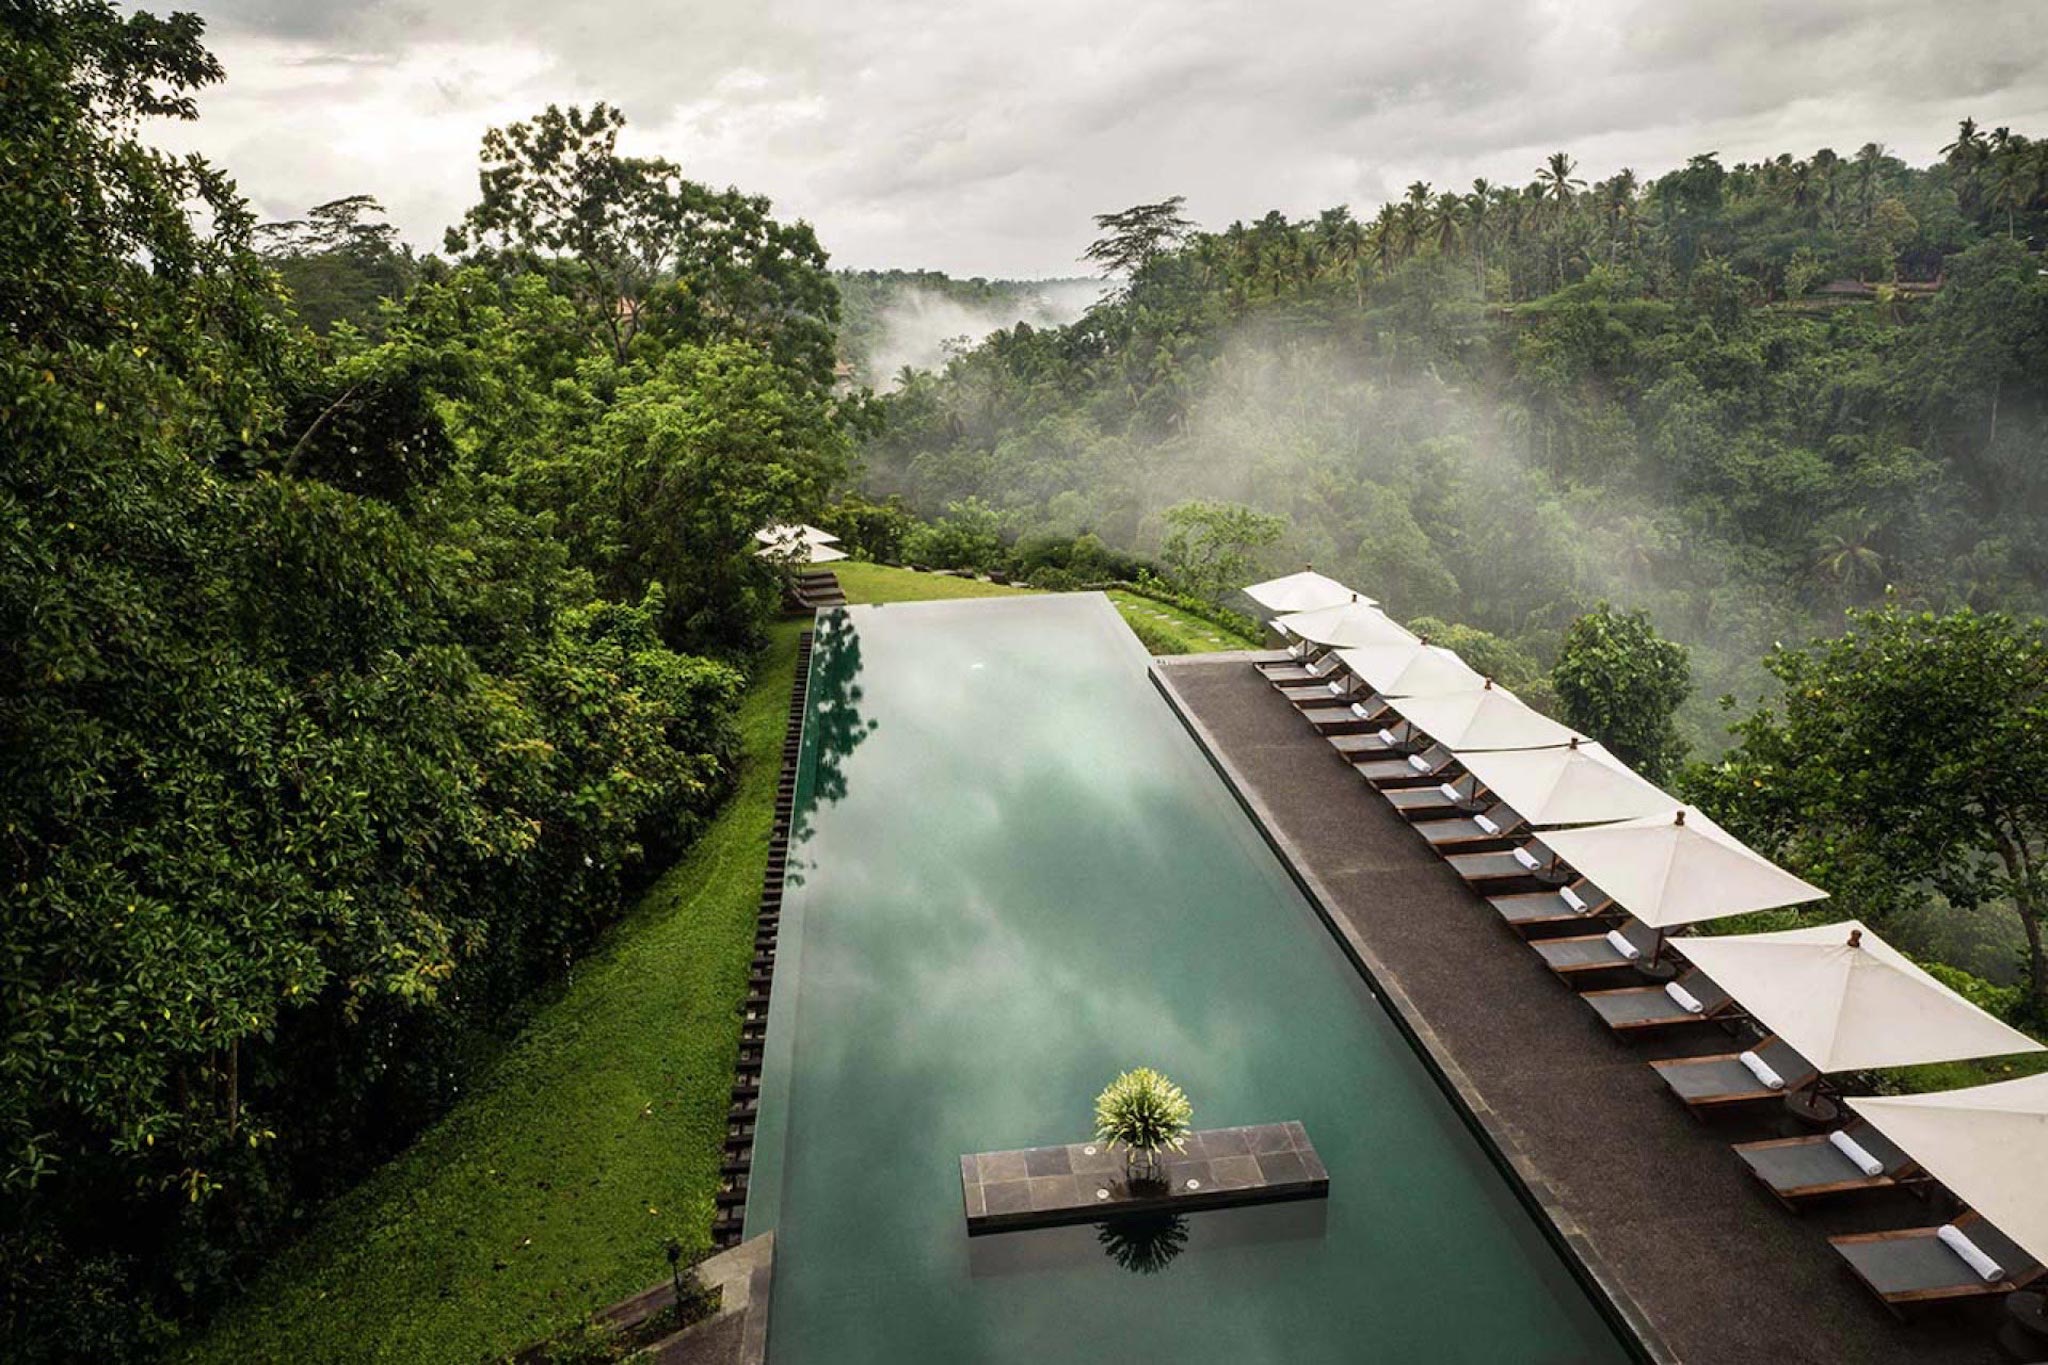 Alila Ubud, Bali, offers nature, art and blues with its Alila Experiences.